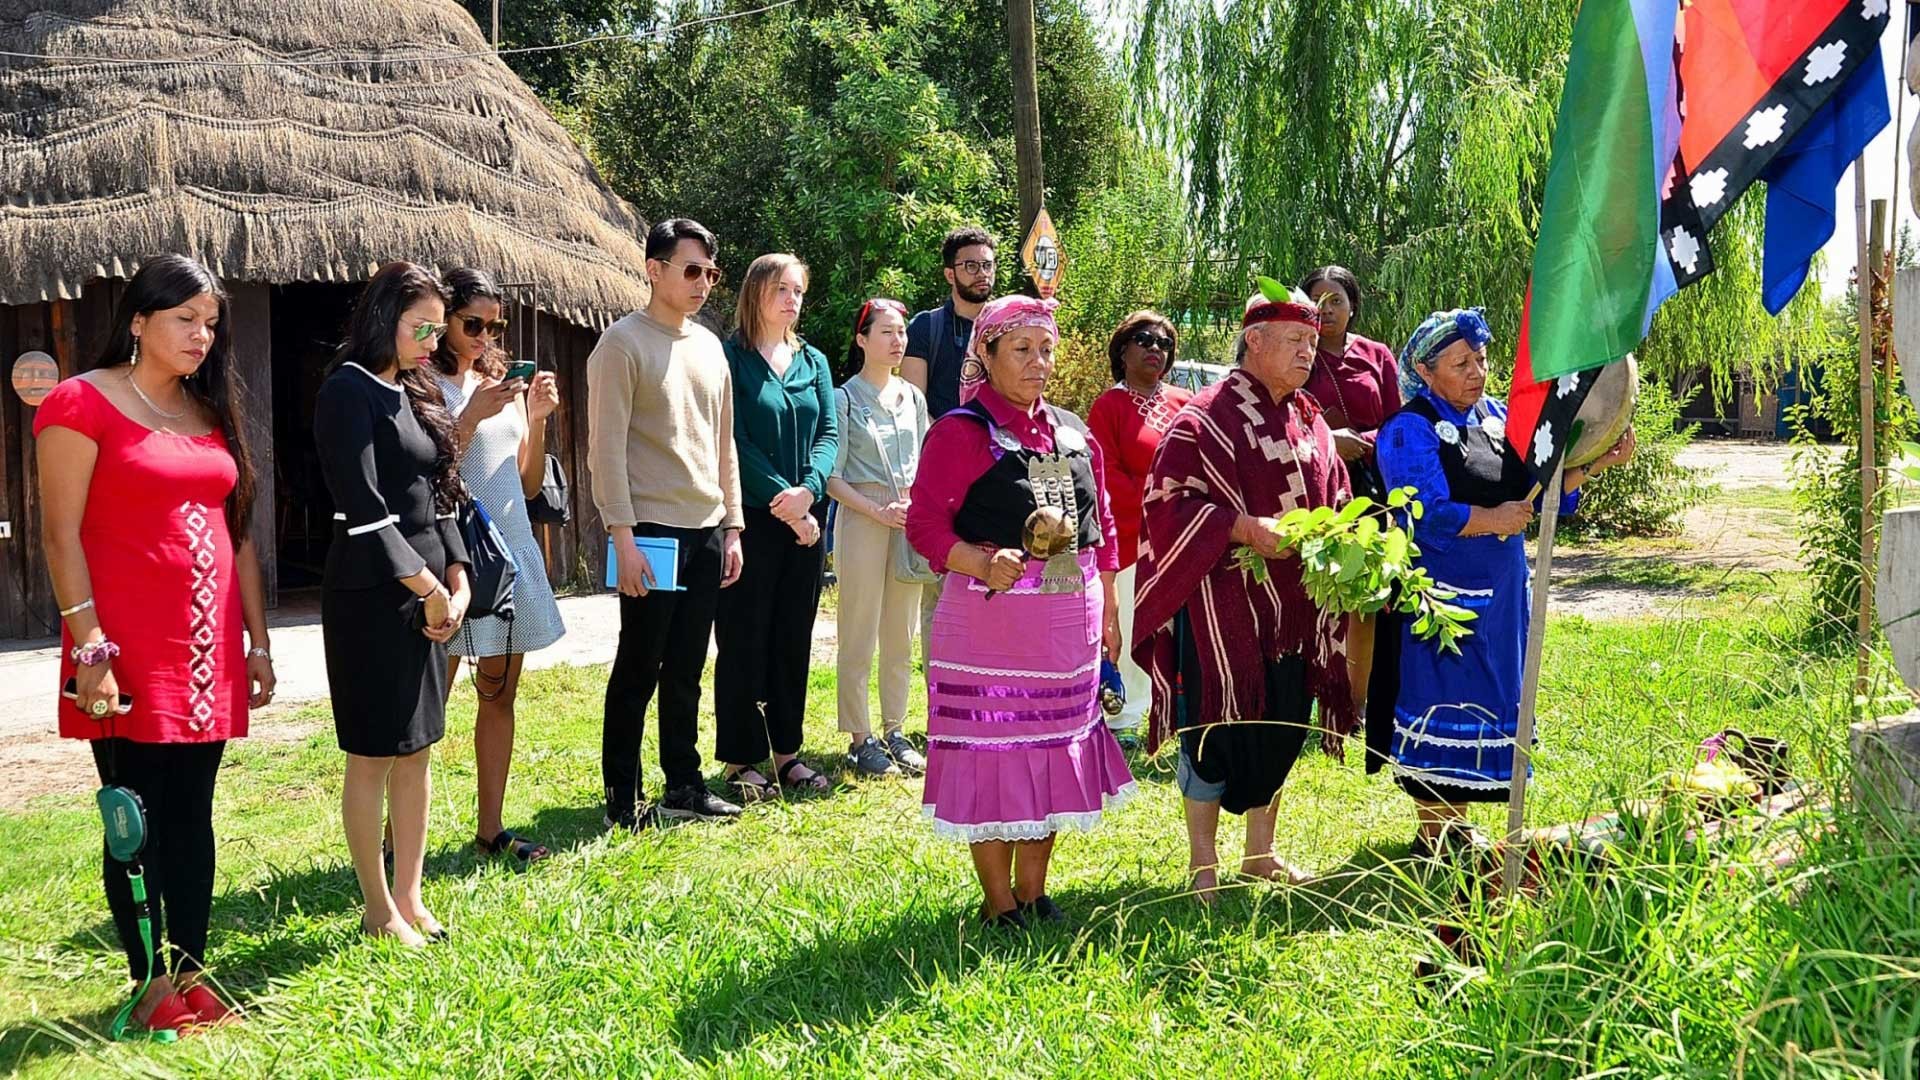 The group at the Mapuche community